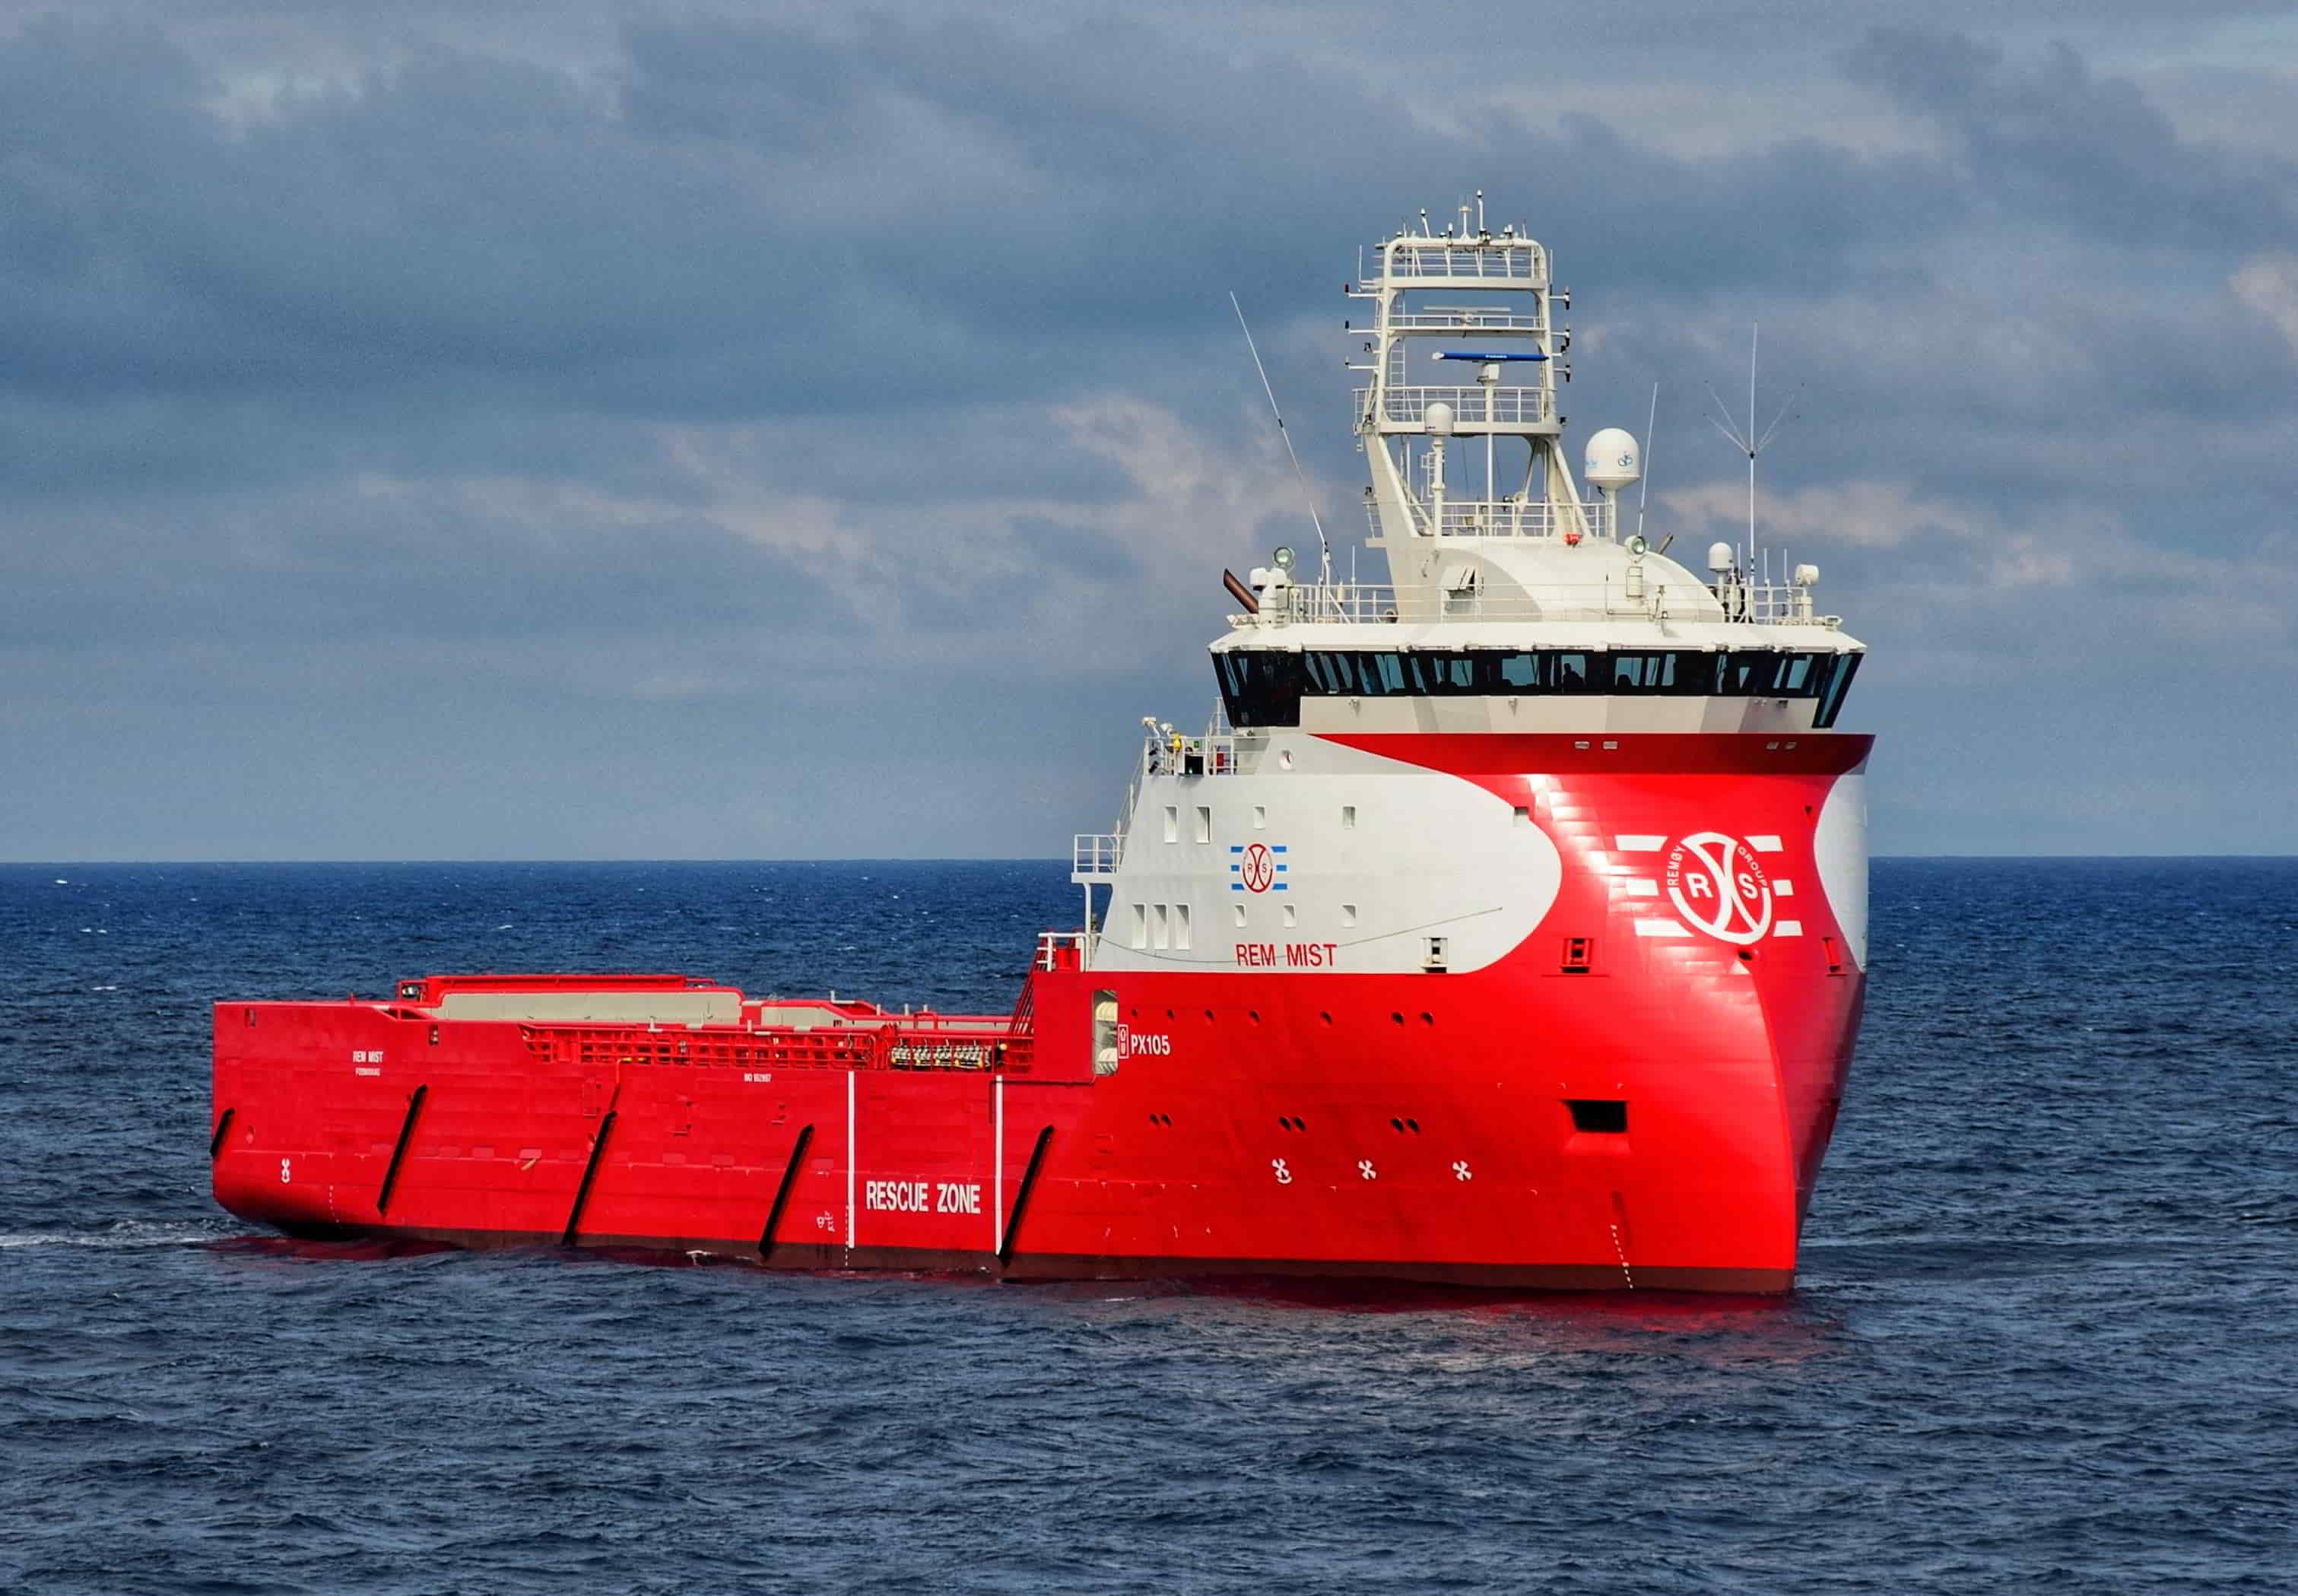 Remøy vessel secures more time with Equinor through new gig